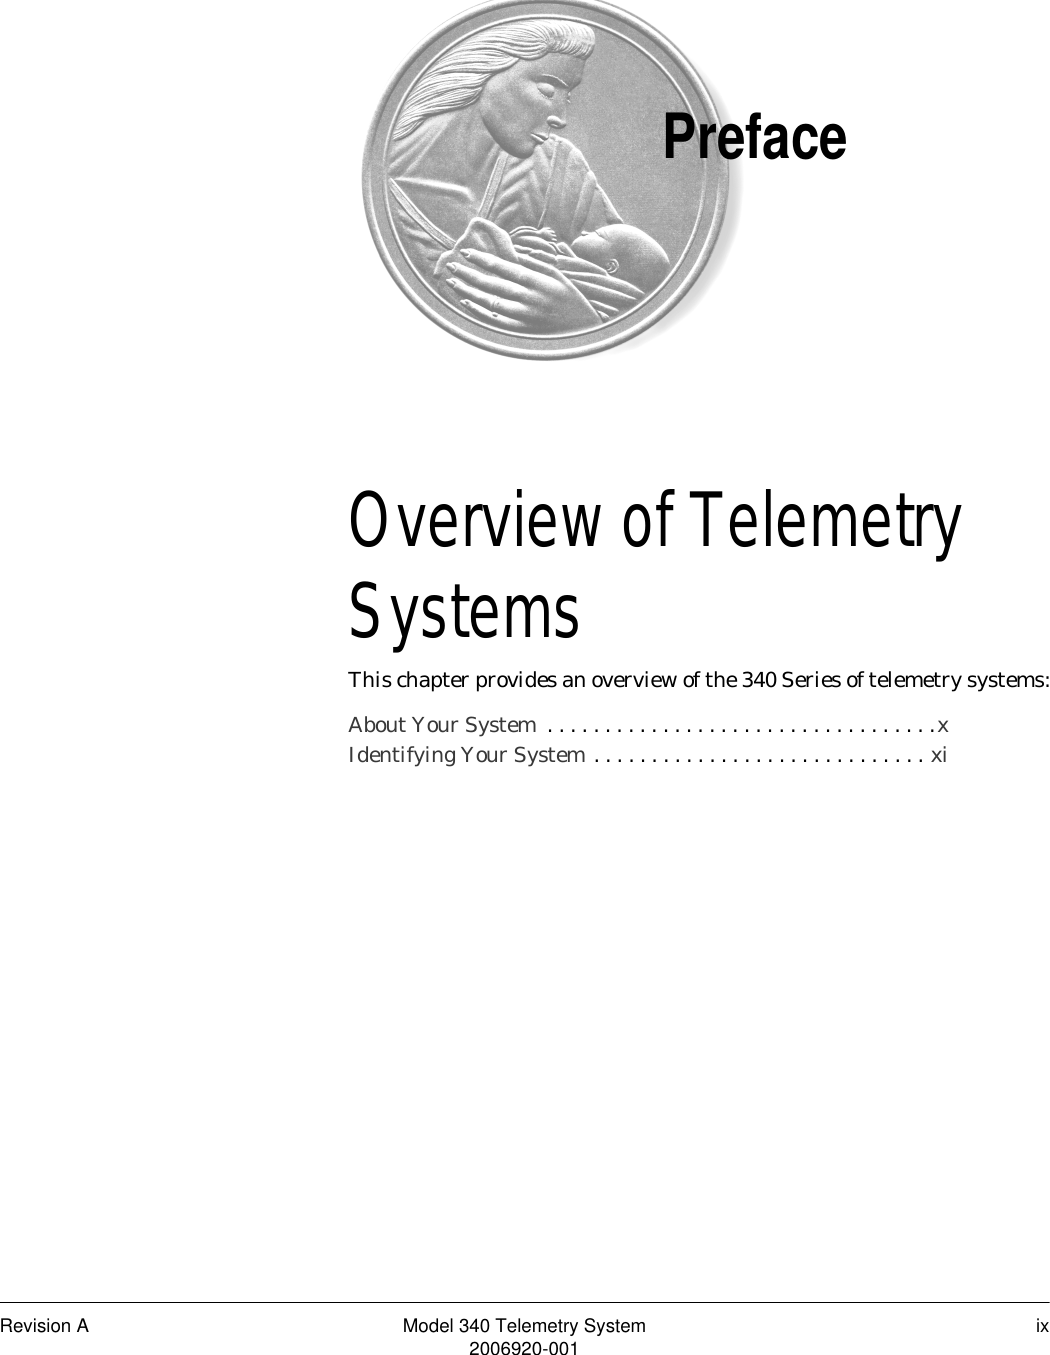 Revision A Model 340 Telemetry System ix2006920-001PrefaceOverview of Telemetry Systems 1This chapter provides an overview of the 340 Series of telemetry systems:About Your System  . . . . . . . . . . . . . . . . . . . . . . . . . . . . . . . . . .xIdentifying Your System . . . . . . . . . . . . . . . . . . . . . . . . . . . . . xi